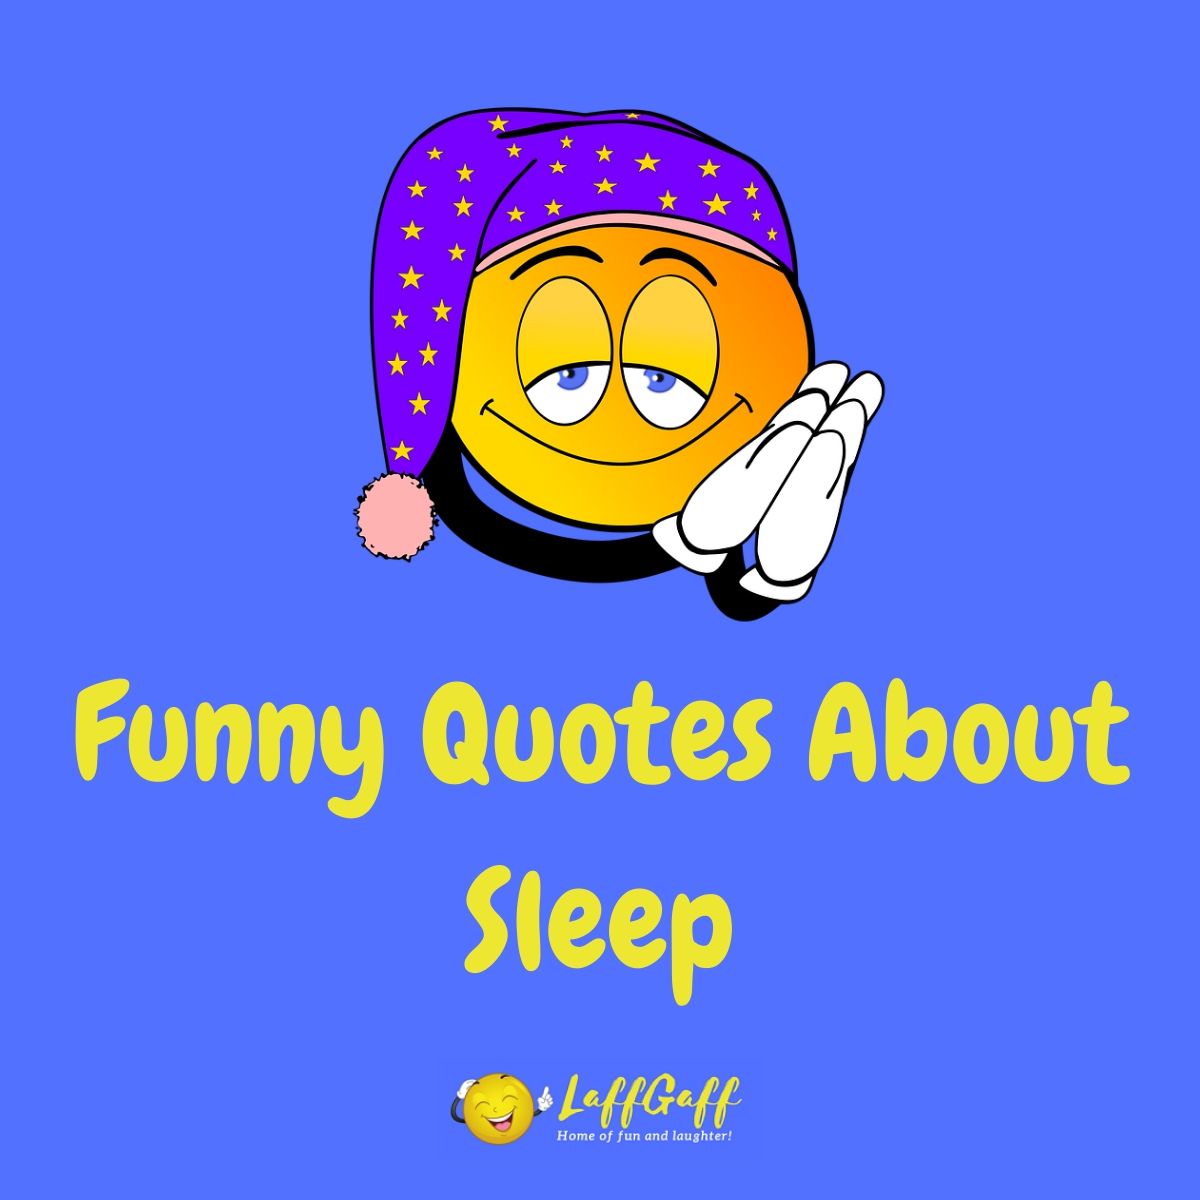 Bedtime quotes funny 21 Great